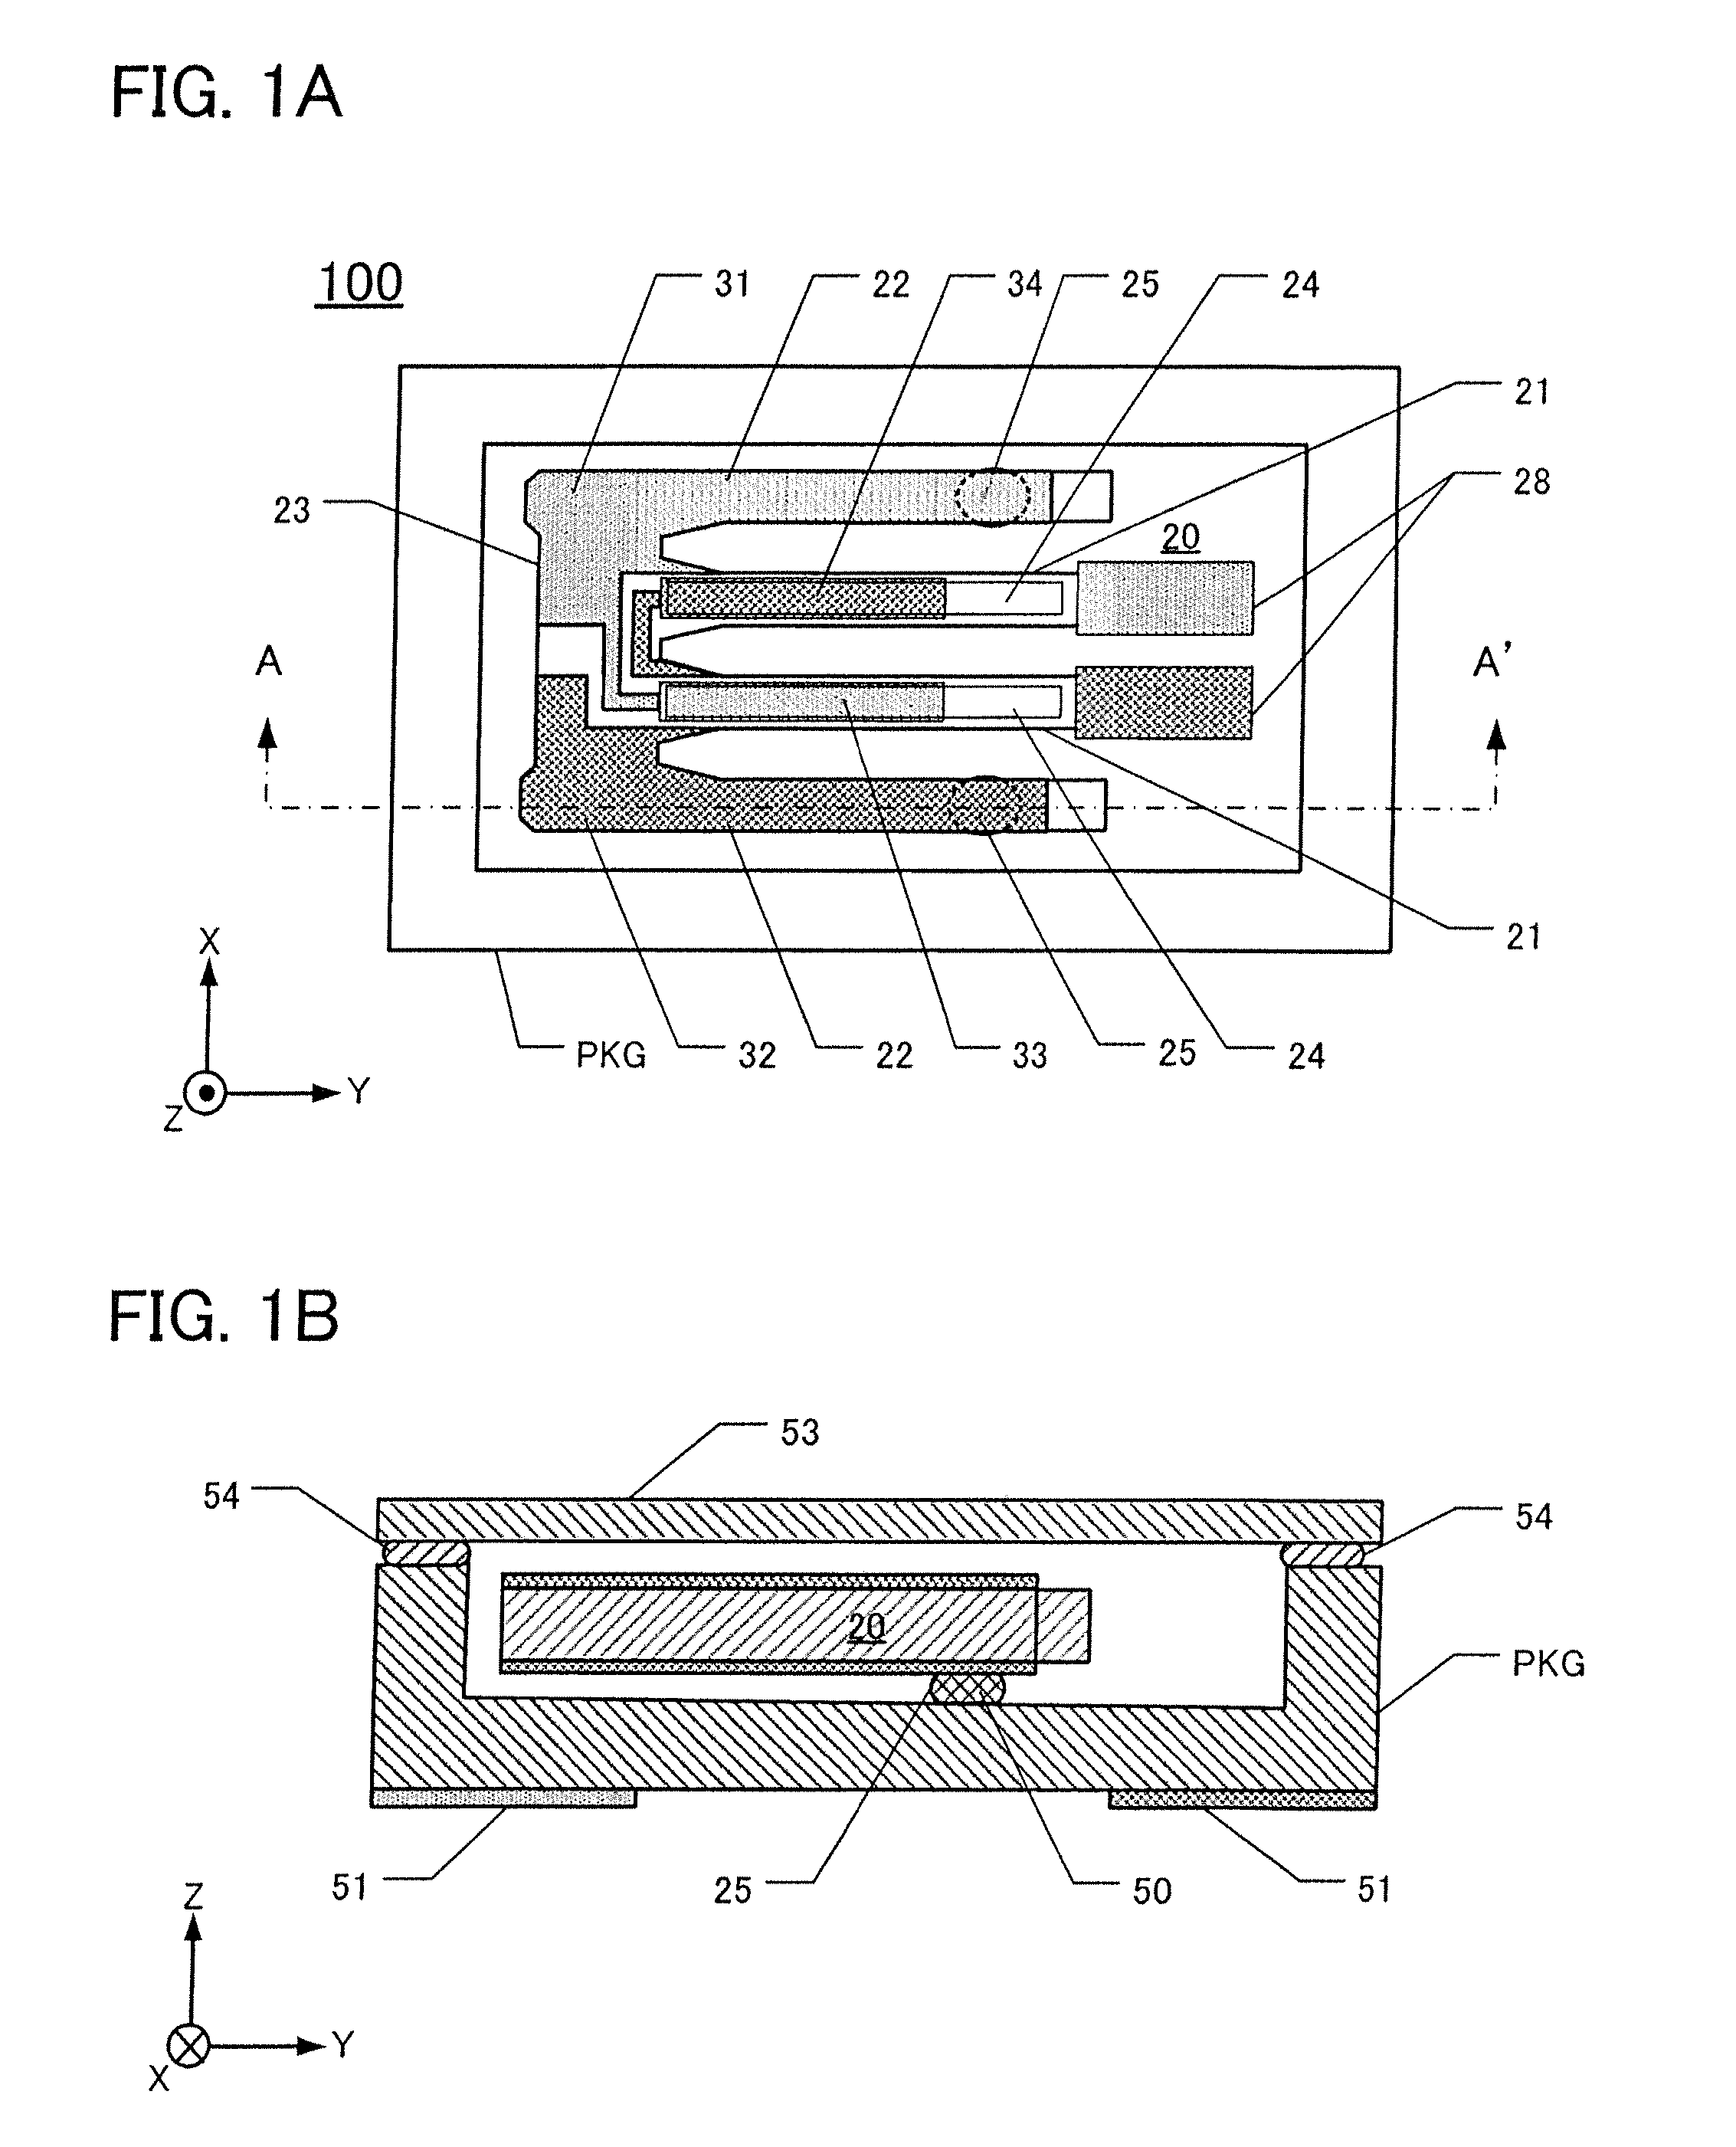 Tuning-fork type quartz-crystal vibrating pieces and piezoelectric devices having low crystal impedance